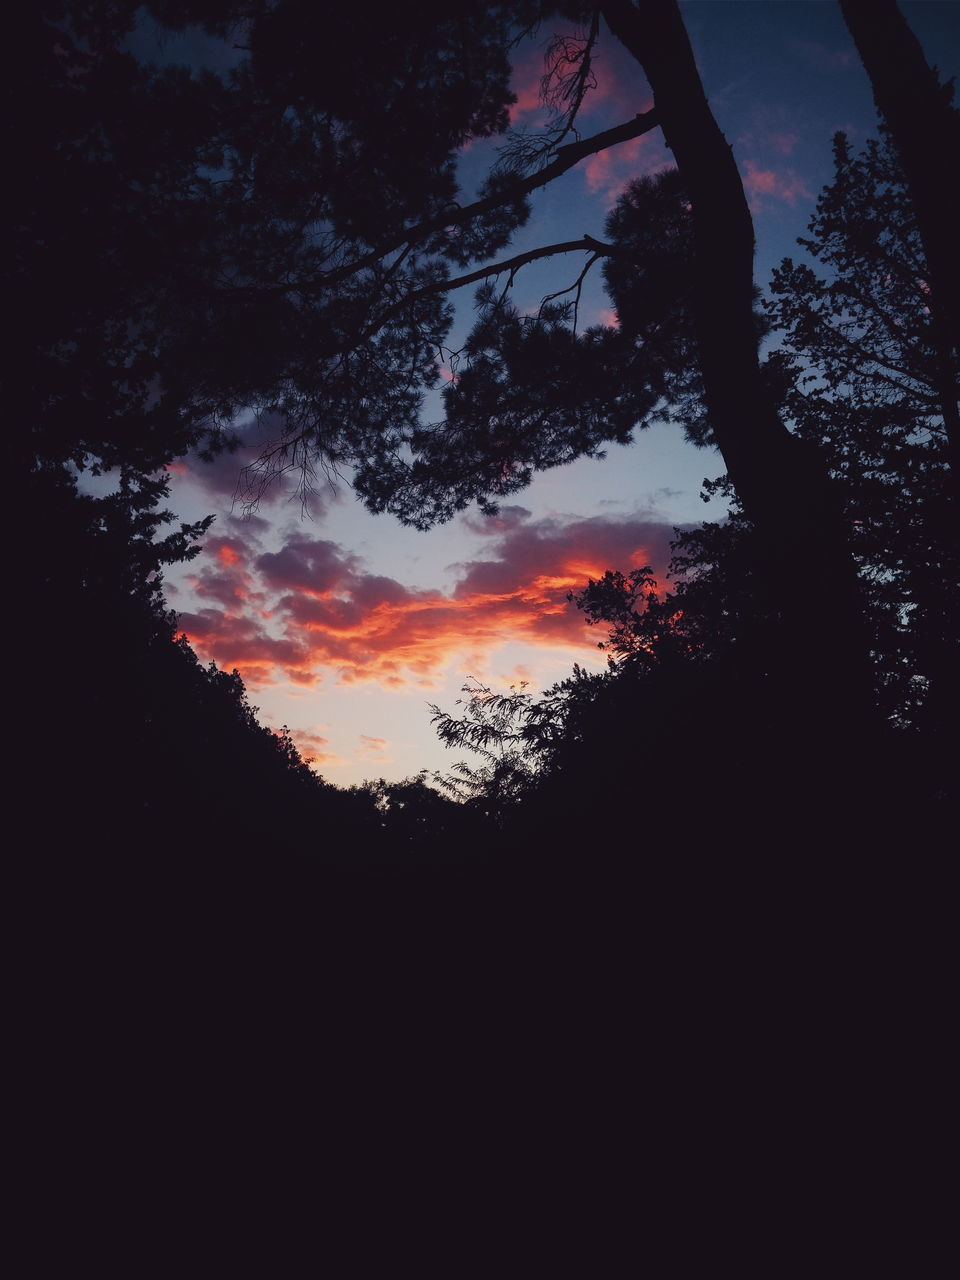 SILHOUETTE OF TREES AT SUNSET